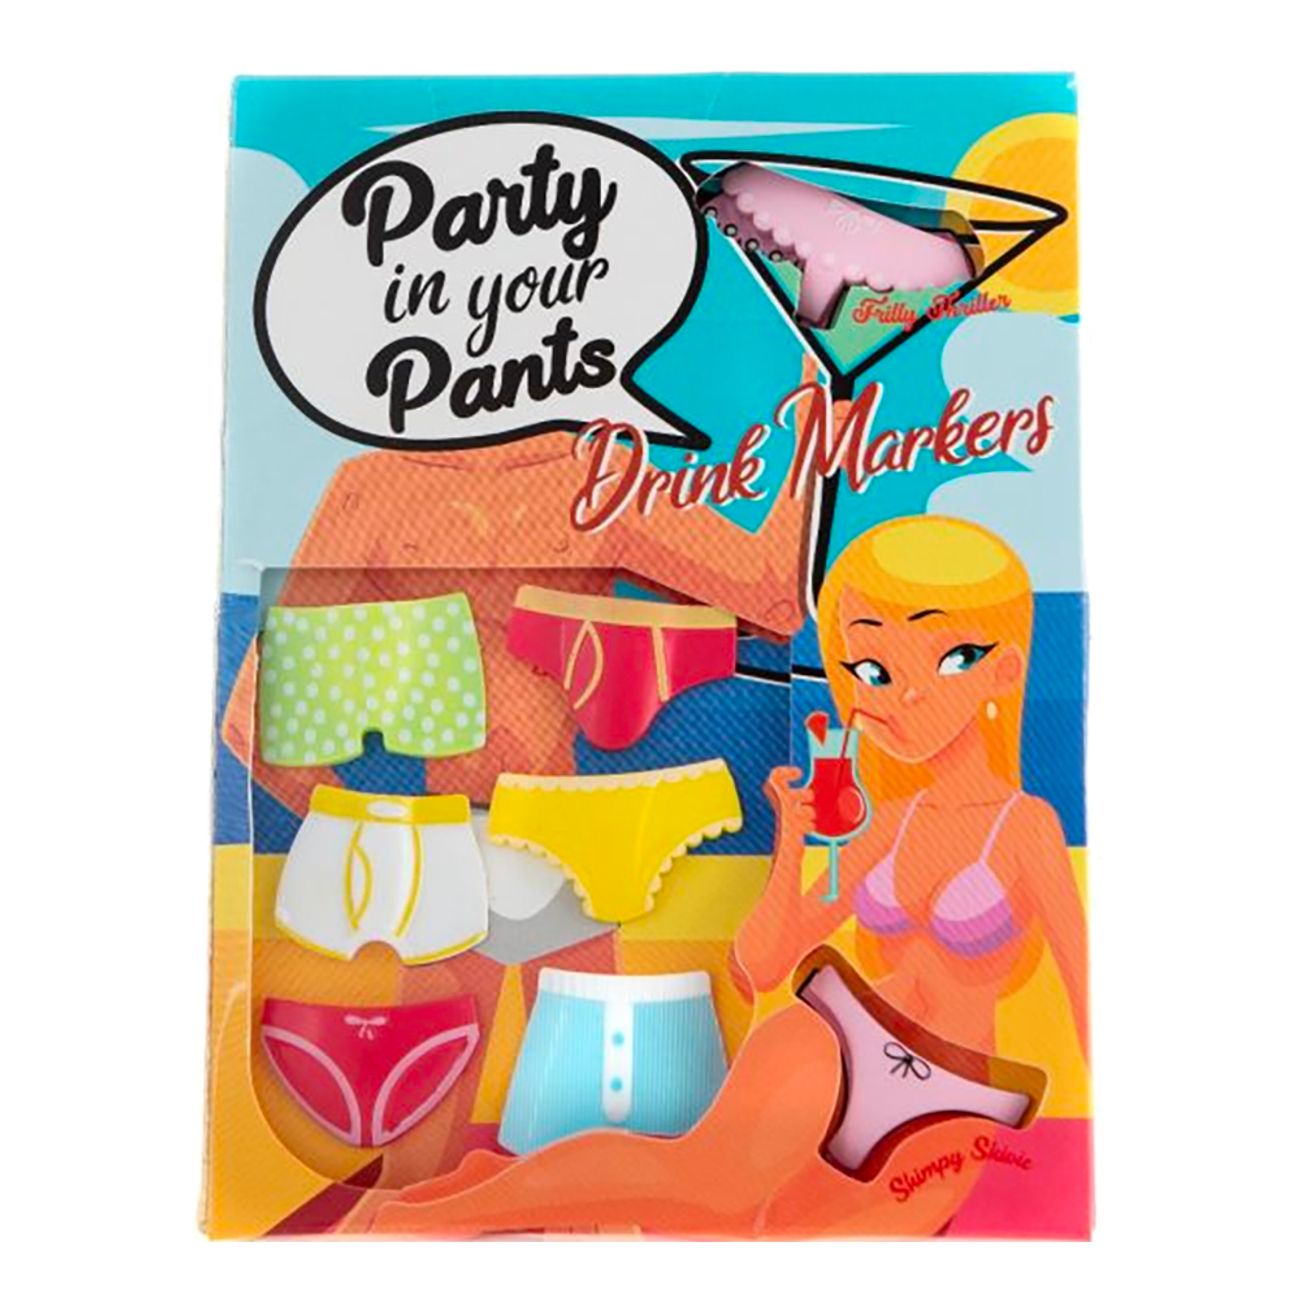 party-in-your-pants-drinkmarkorer-81336-1